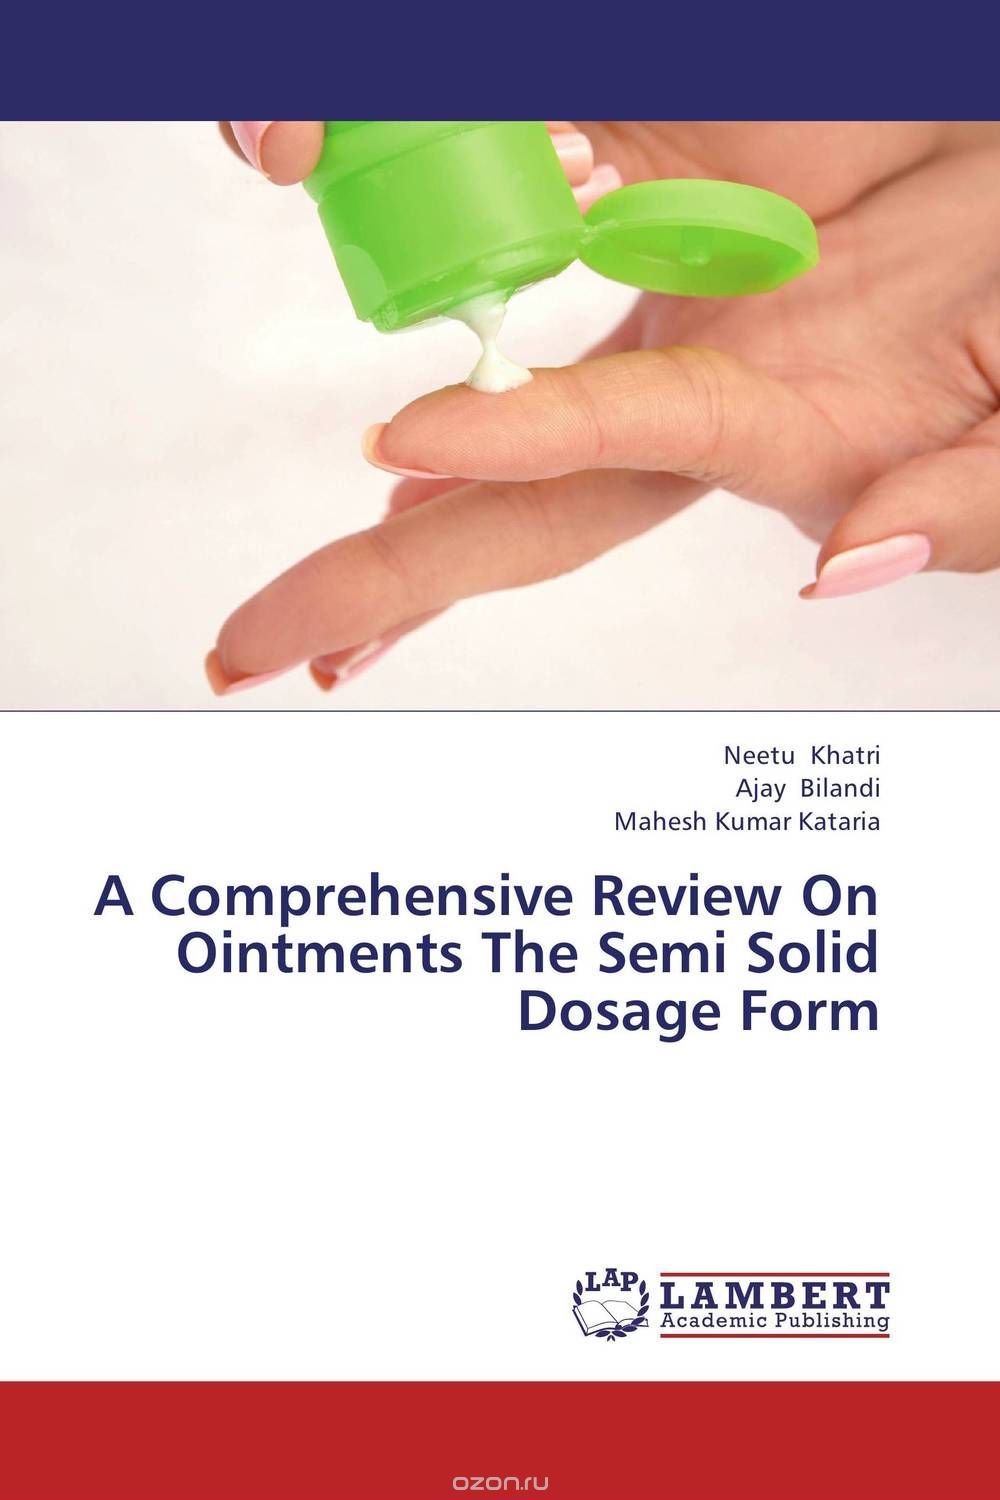 Скачать книгу "A Comprehensive Review On Ointments The Semi Solid Dosage Form"